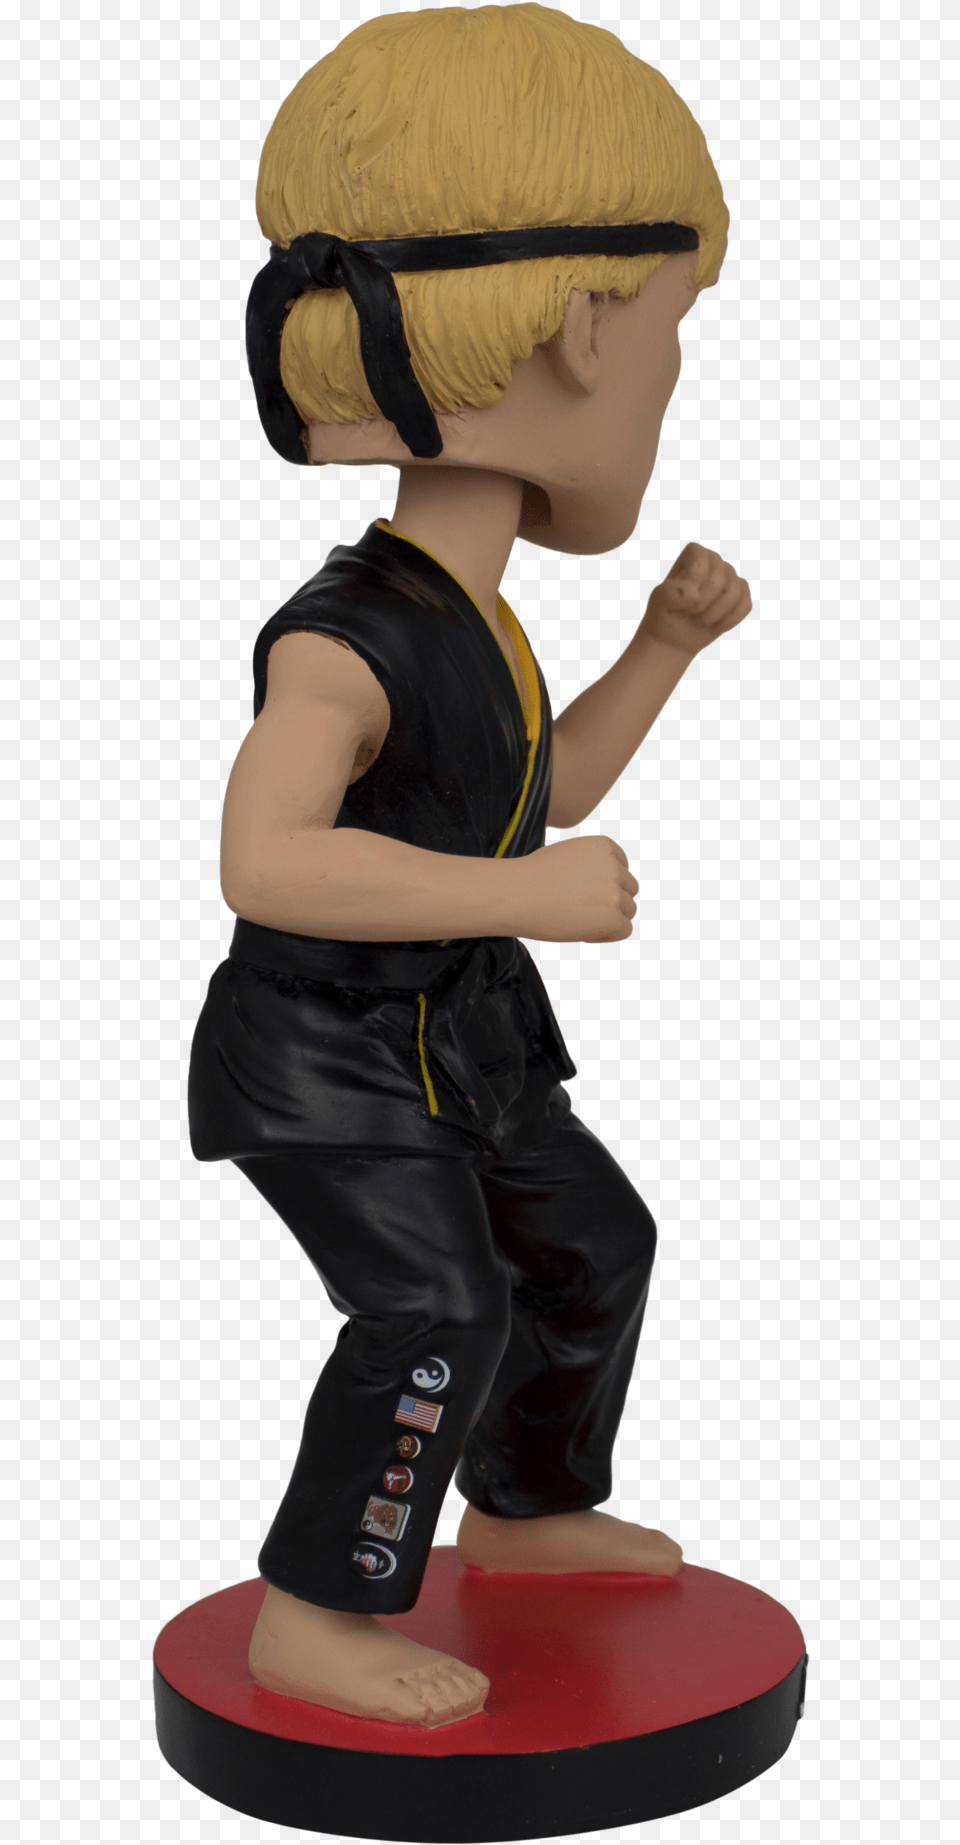 The Karate Kid Johnny Lawrence Bobblehead Figurine, Kneeling, Person, Boy, Child Png Image